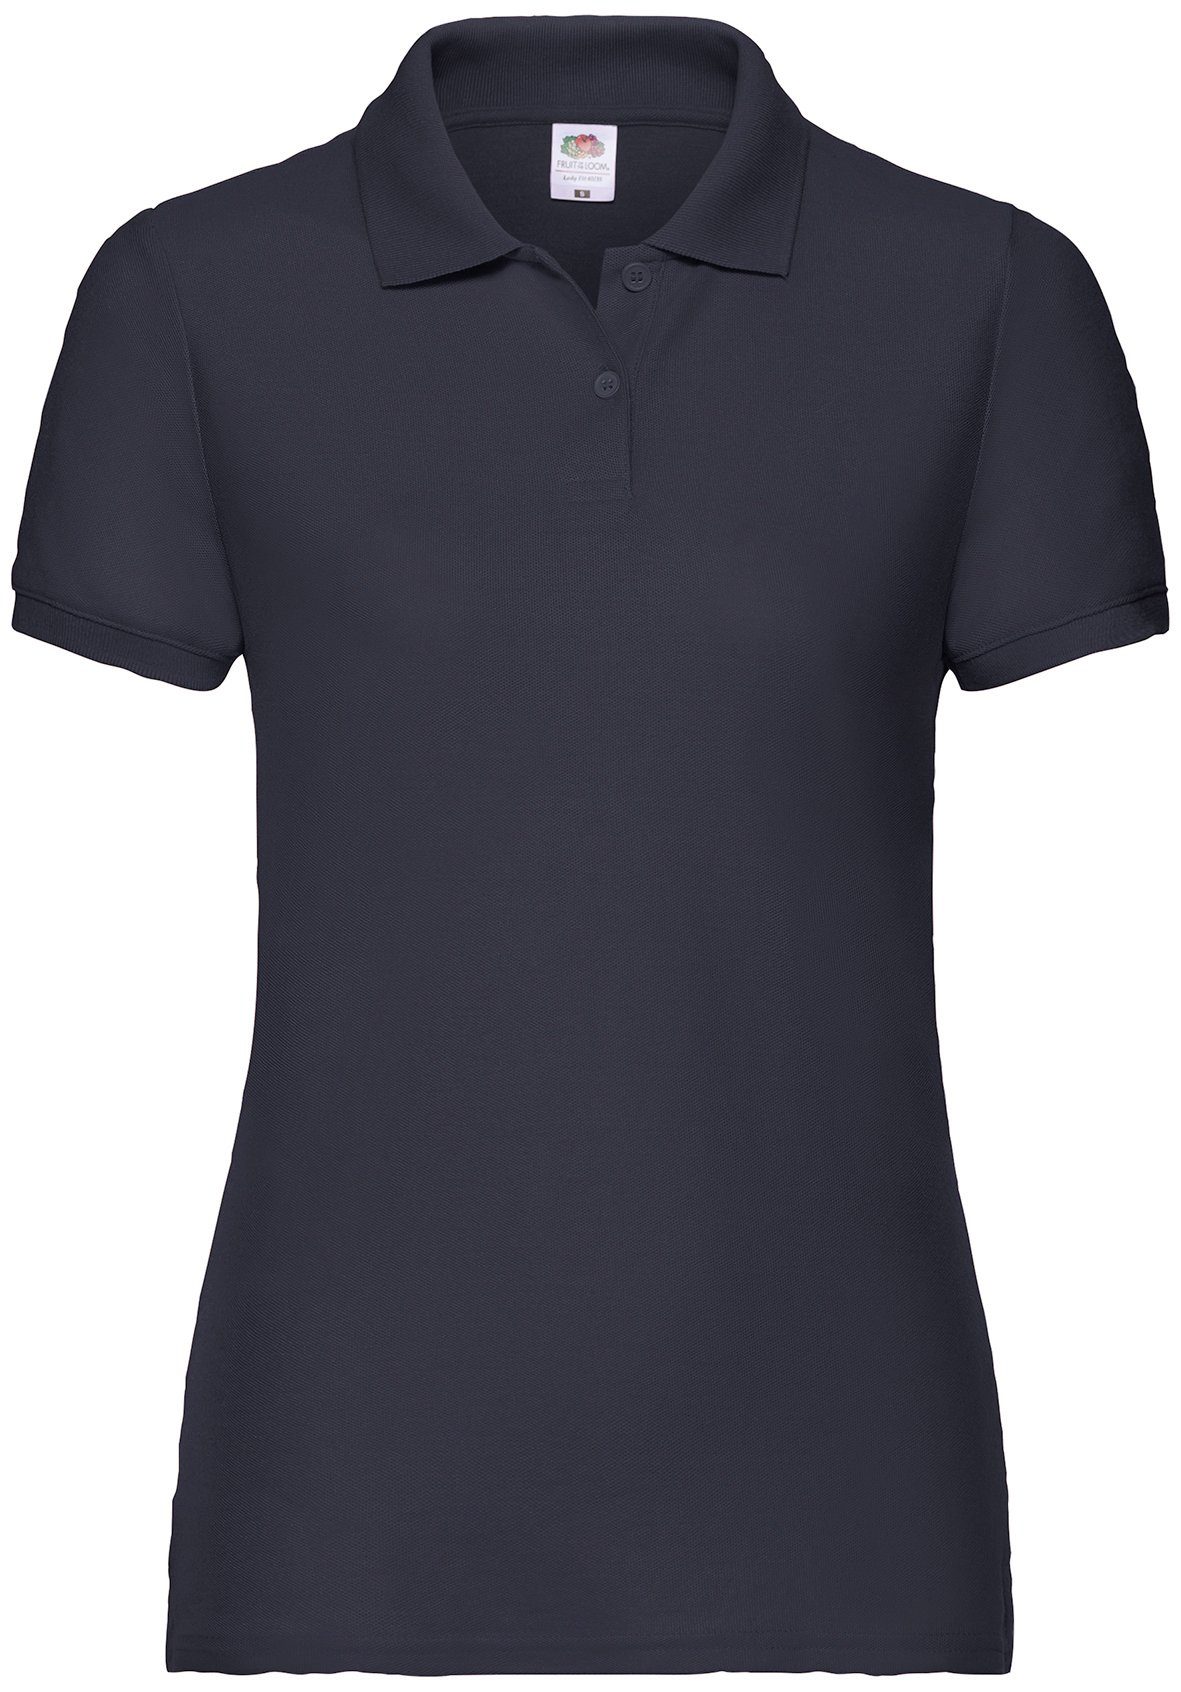 Fruit of the Loom Fruit Poloshirt navy Lady-Fit 65/35 Polo of Loom deep the